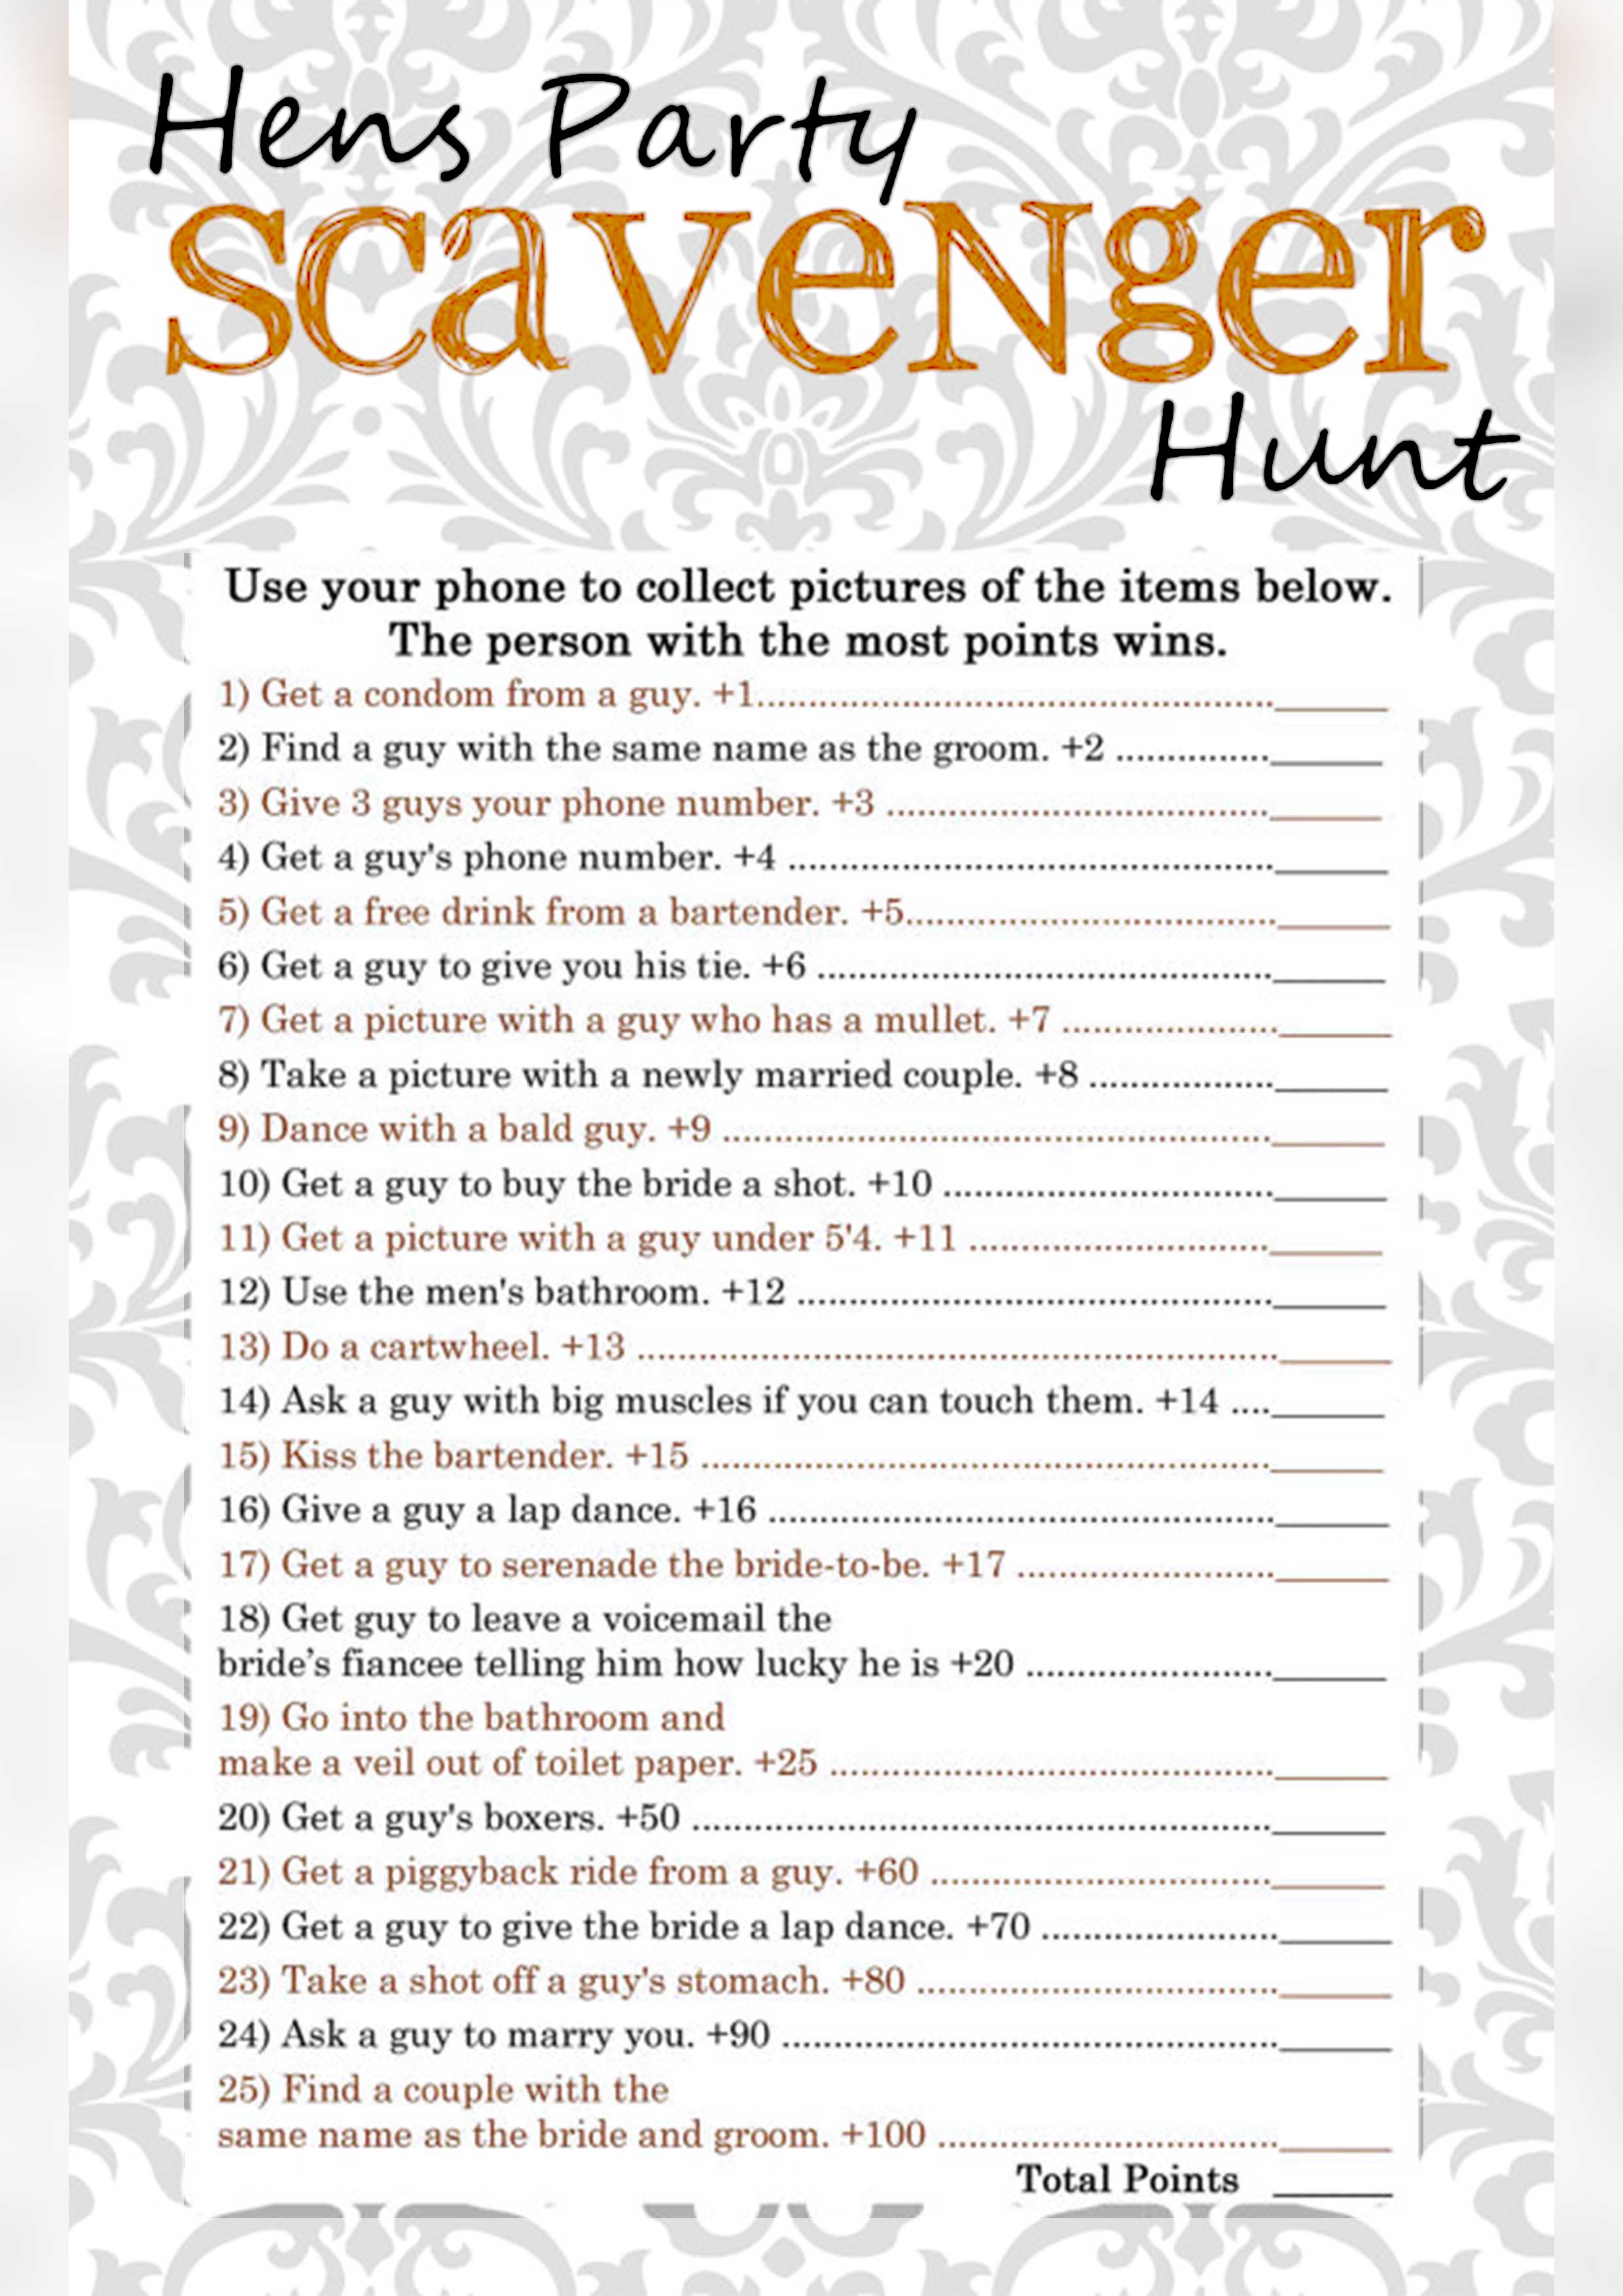 mens-Bachelor-party tasks-ideas-using-phone-scavenger-hunt-tips-how-to